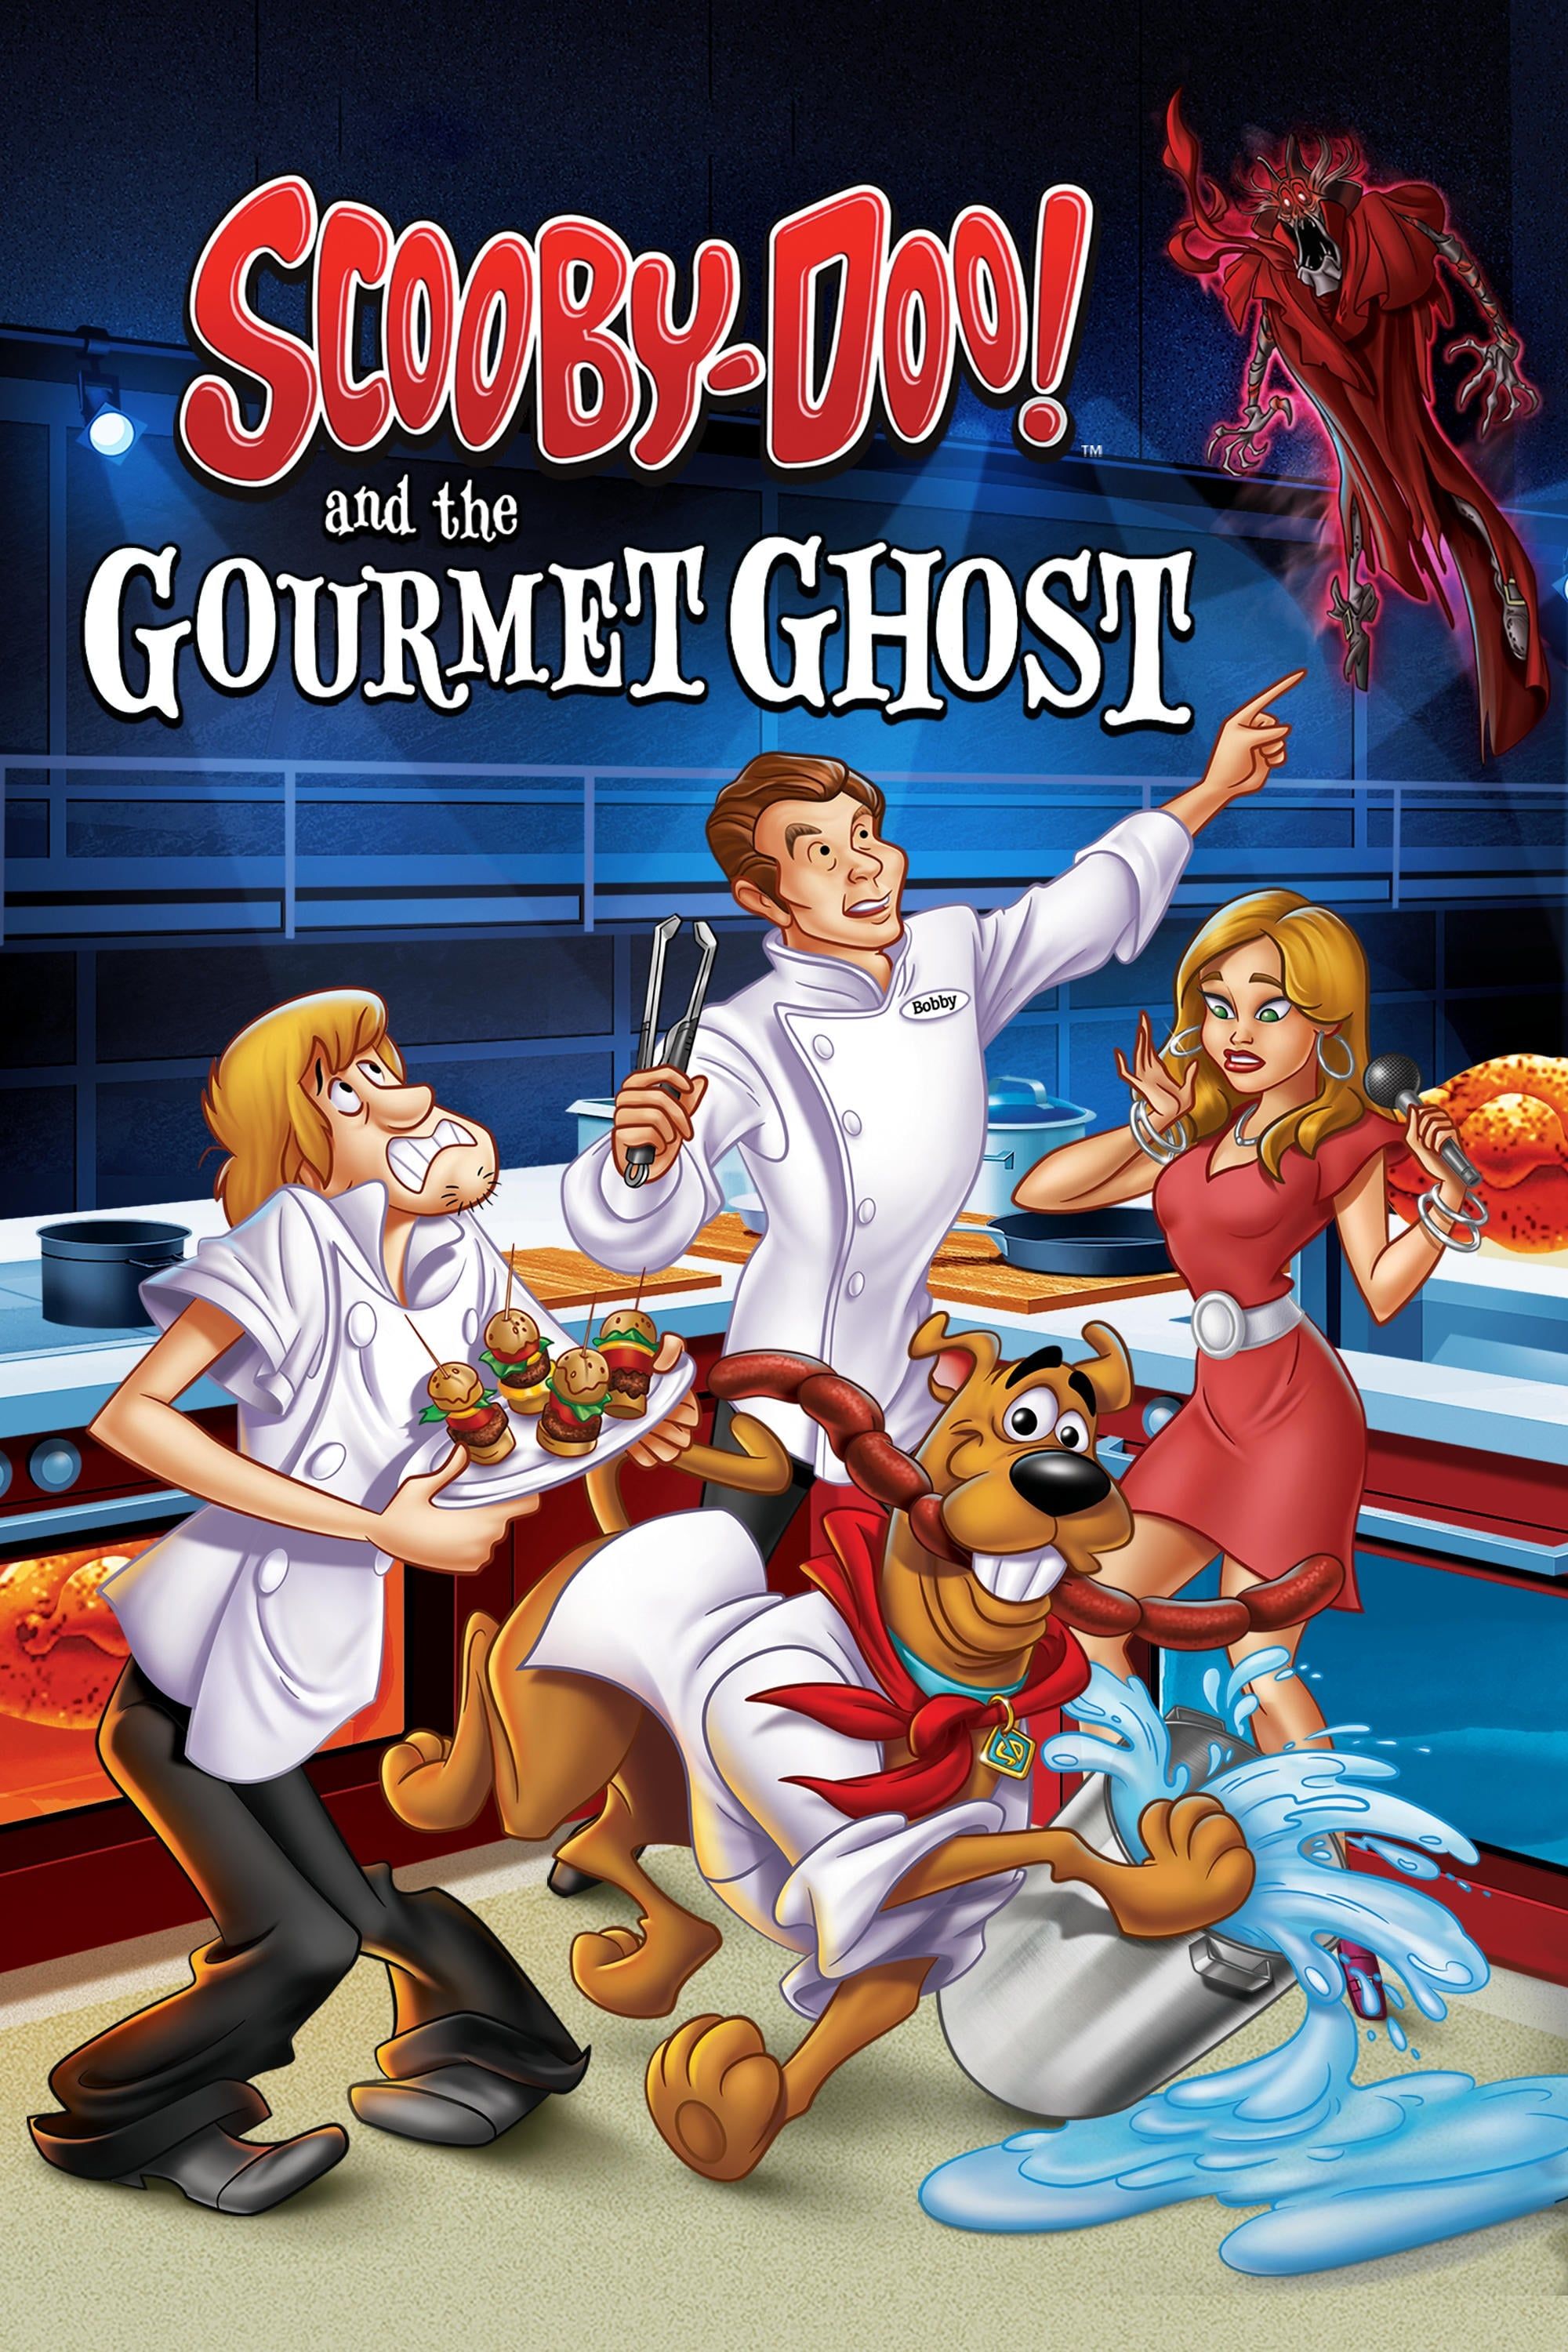 Scooby-Doo and the Gourmet Ghost